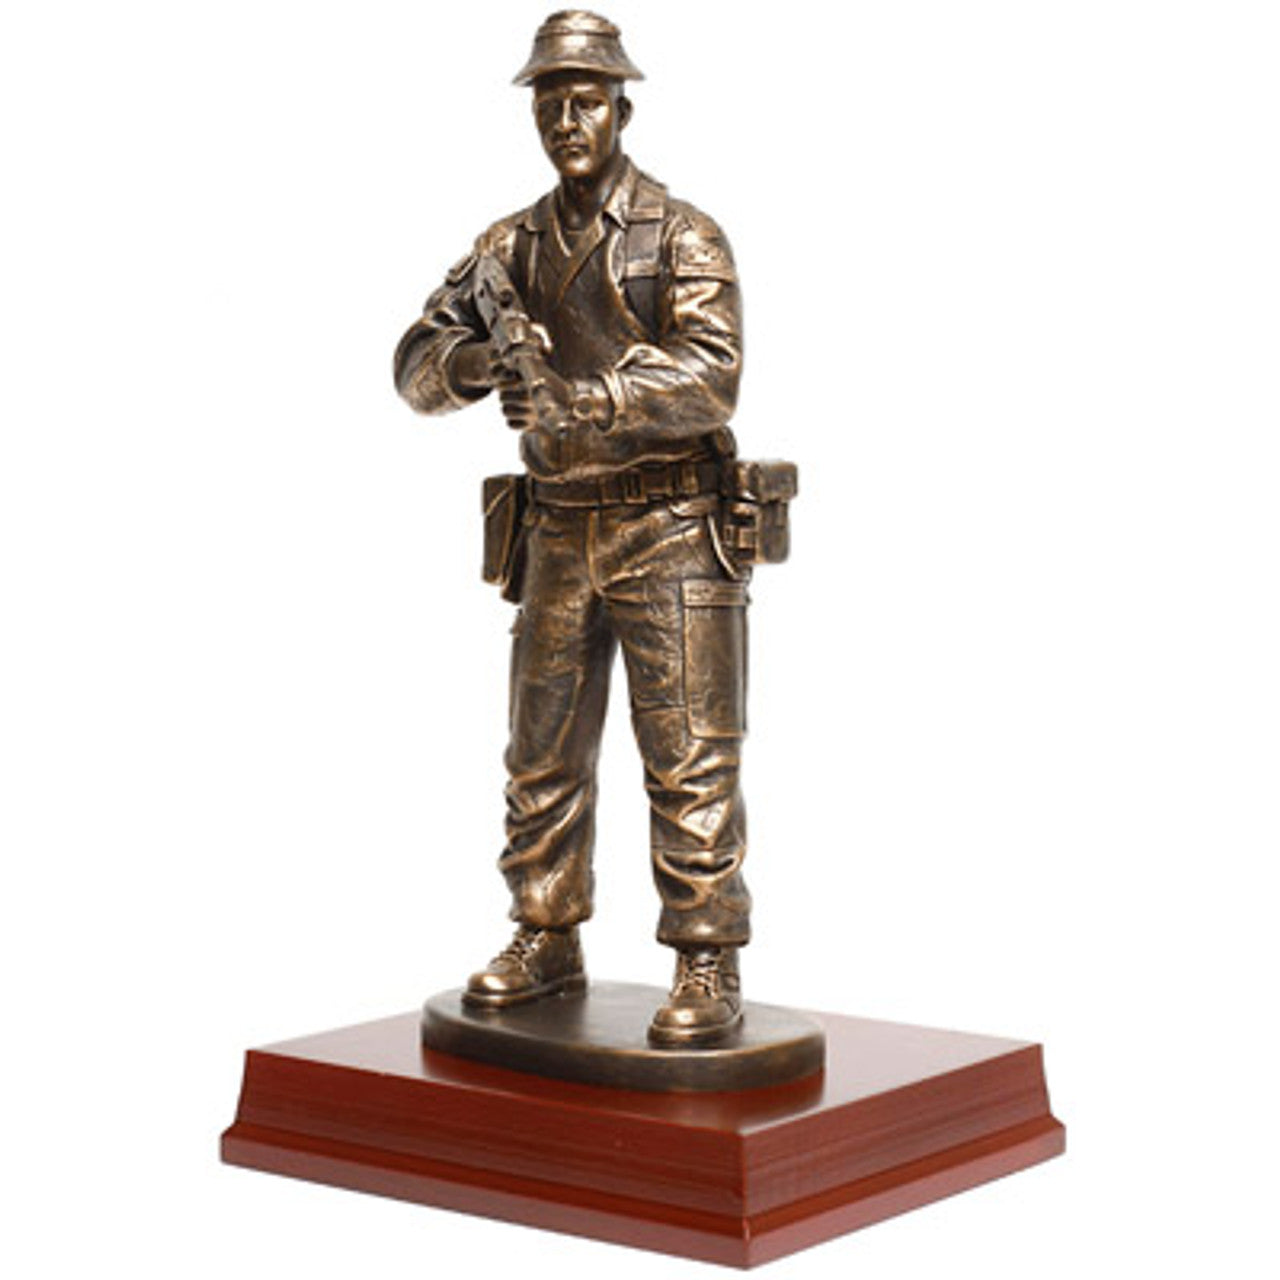 Male Recruit Figurine is the perfect present for serving members or veterans. This superb 295mm tall female Army recruit figurine is the ideal gift, award or collectable. www.defenceqstore.com.au